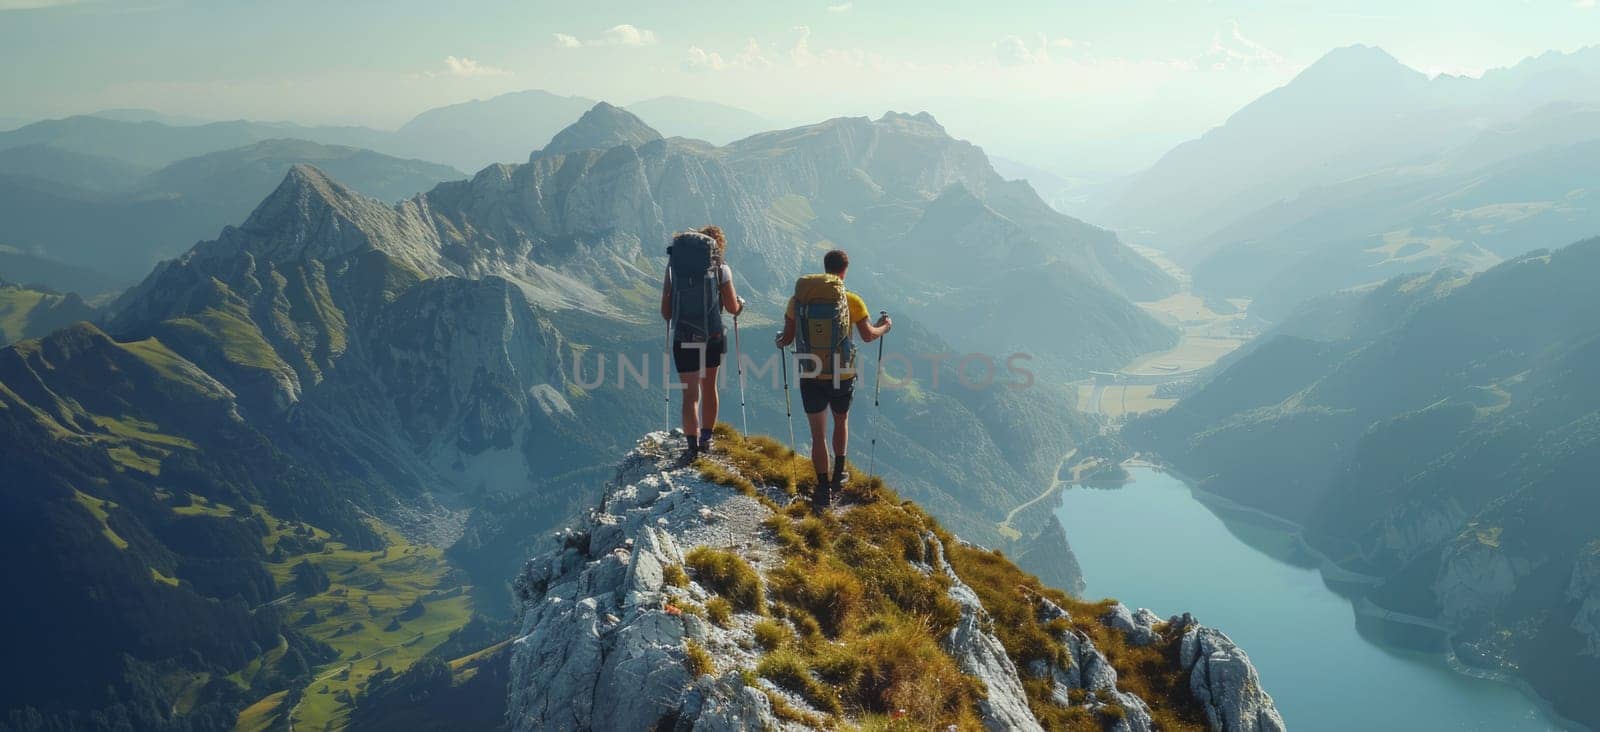 Two people are hiking up a mountain and looking out over a valley. The scene is peaceful and serene, with the mountains in the background and the lake in the foreground